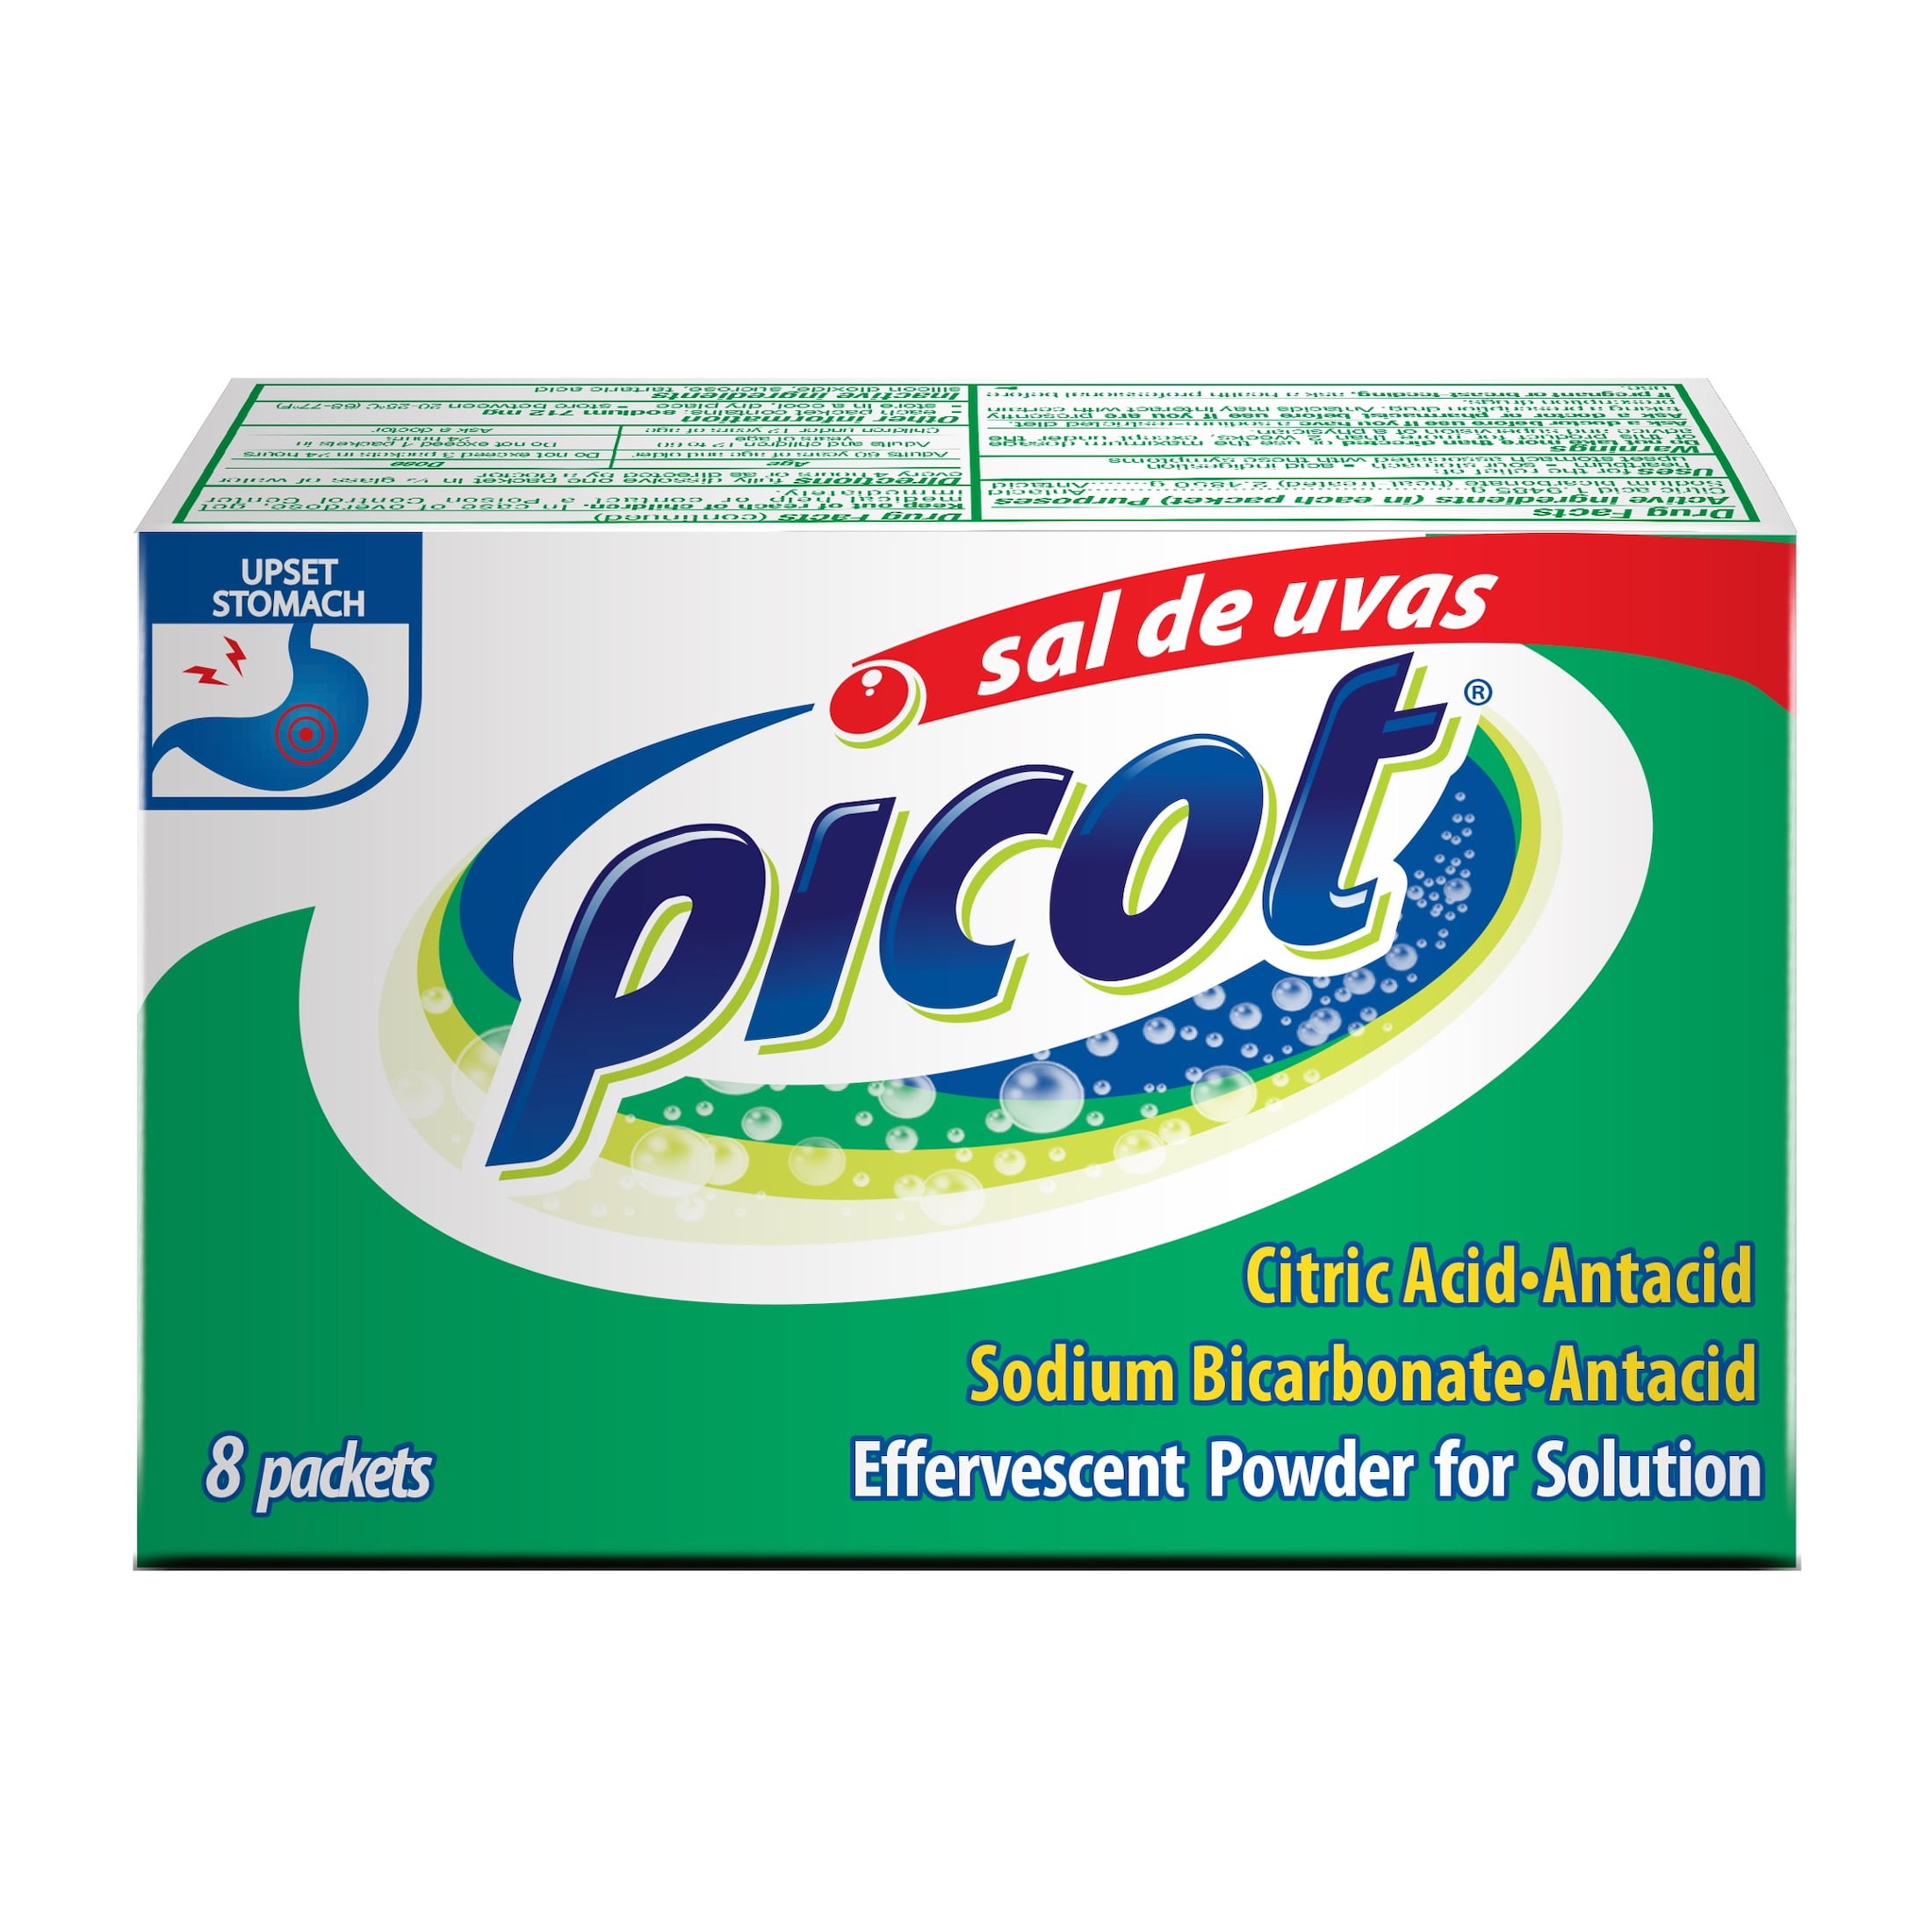 SAL DE UVAS PICOT, Effervescent Powder Solution, Antacid, 3-Pack of 12  Antacid Packets, 12 Count (Pack of 3)